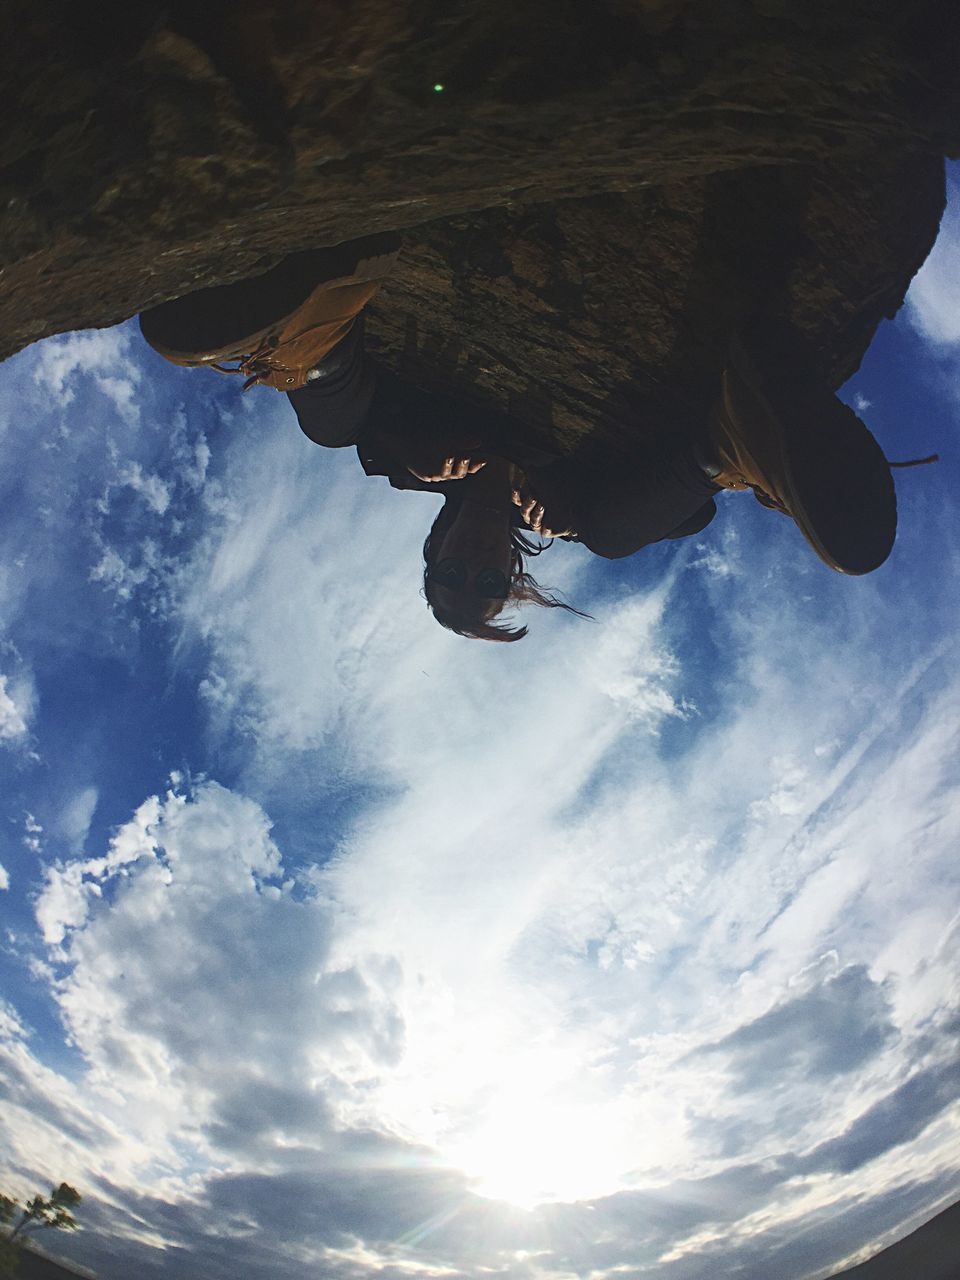 low angle view, mid-air, sky, one person, day, real people, cloud - sky, leisure activity, adventure, men, jumping, outdoors, extreme sports, full length, nature, energetic, fish-eye lens, people